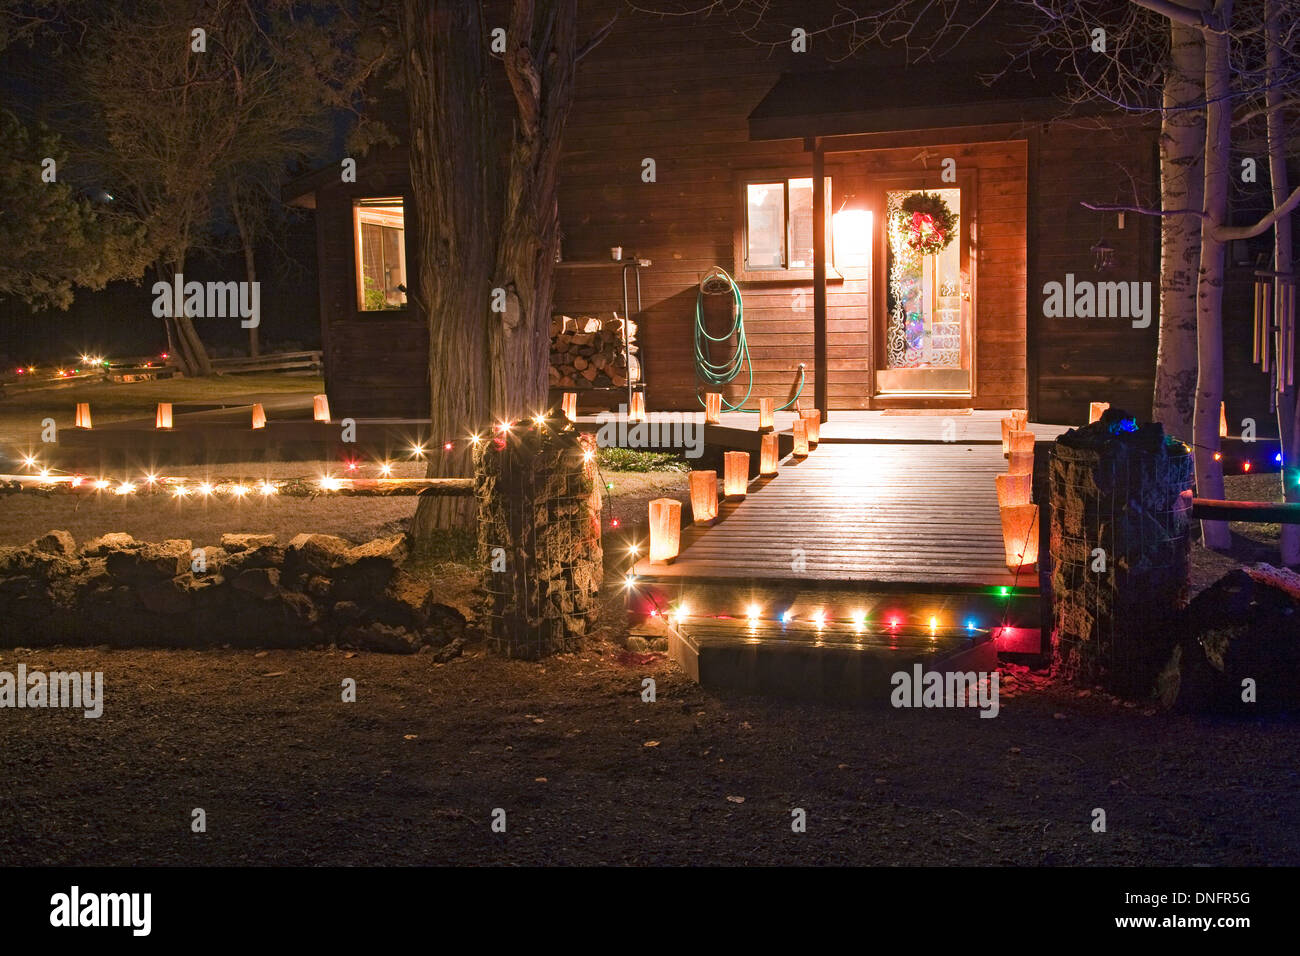 Christmas lights and New Mexican farolitos around the front deck of a house on Christmas Eve. Stock Photo